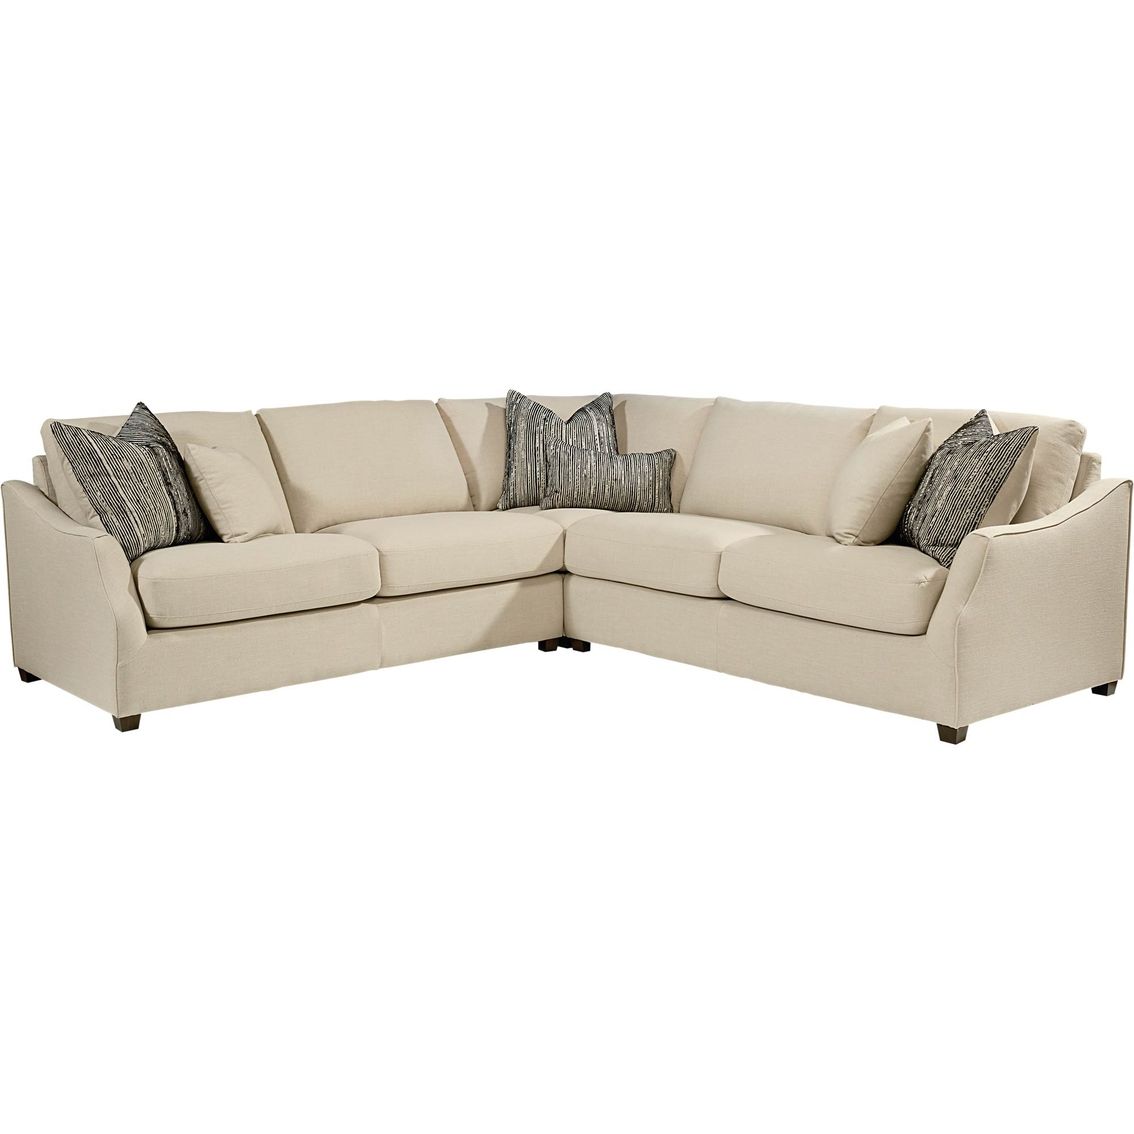 Magnolia Home 3 Pc. Sectional | Sofas & Couches | Home & Appliances Inside Magnolia Home Ravel Linen Sofa Chairs (Photo 9 of 25)